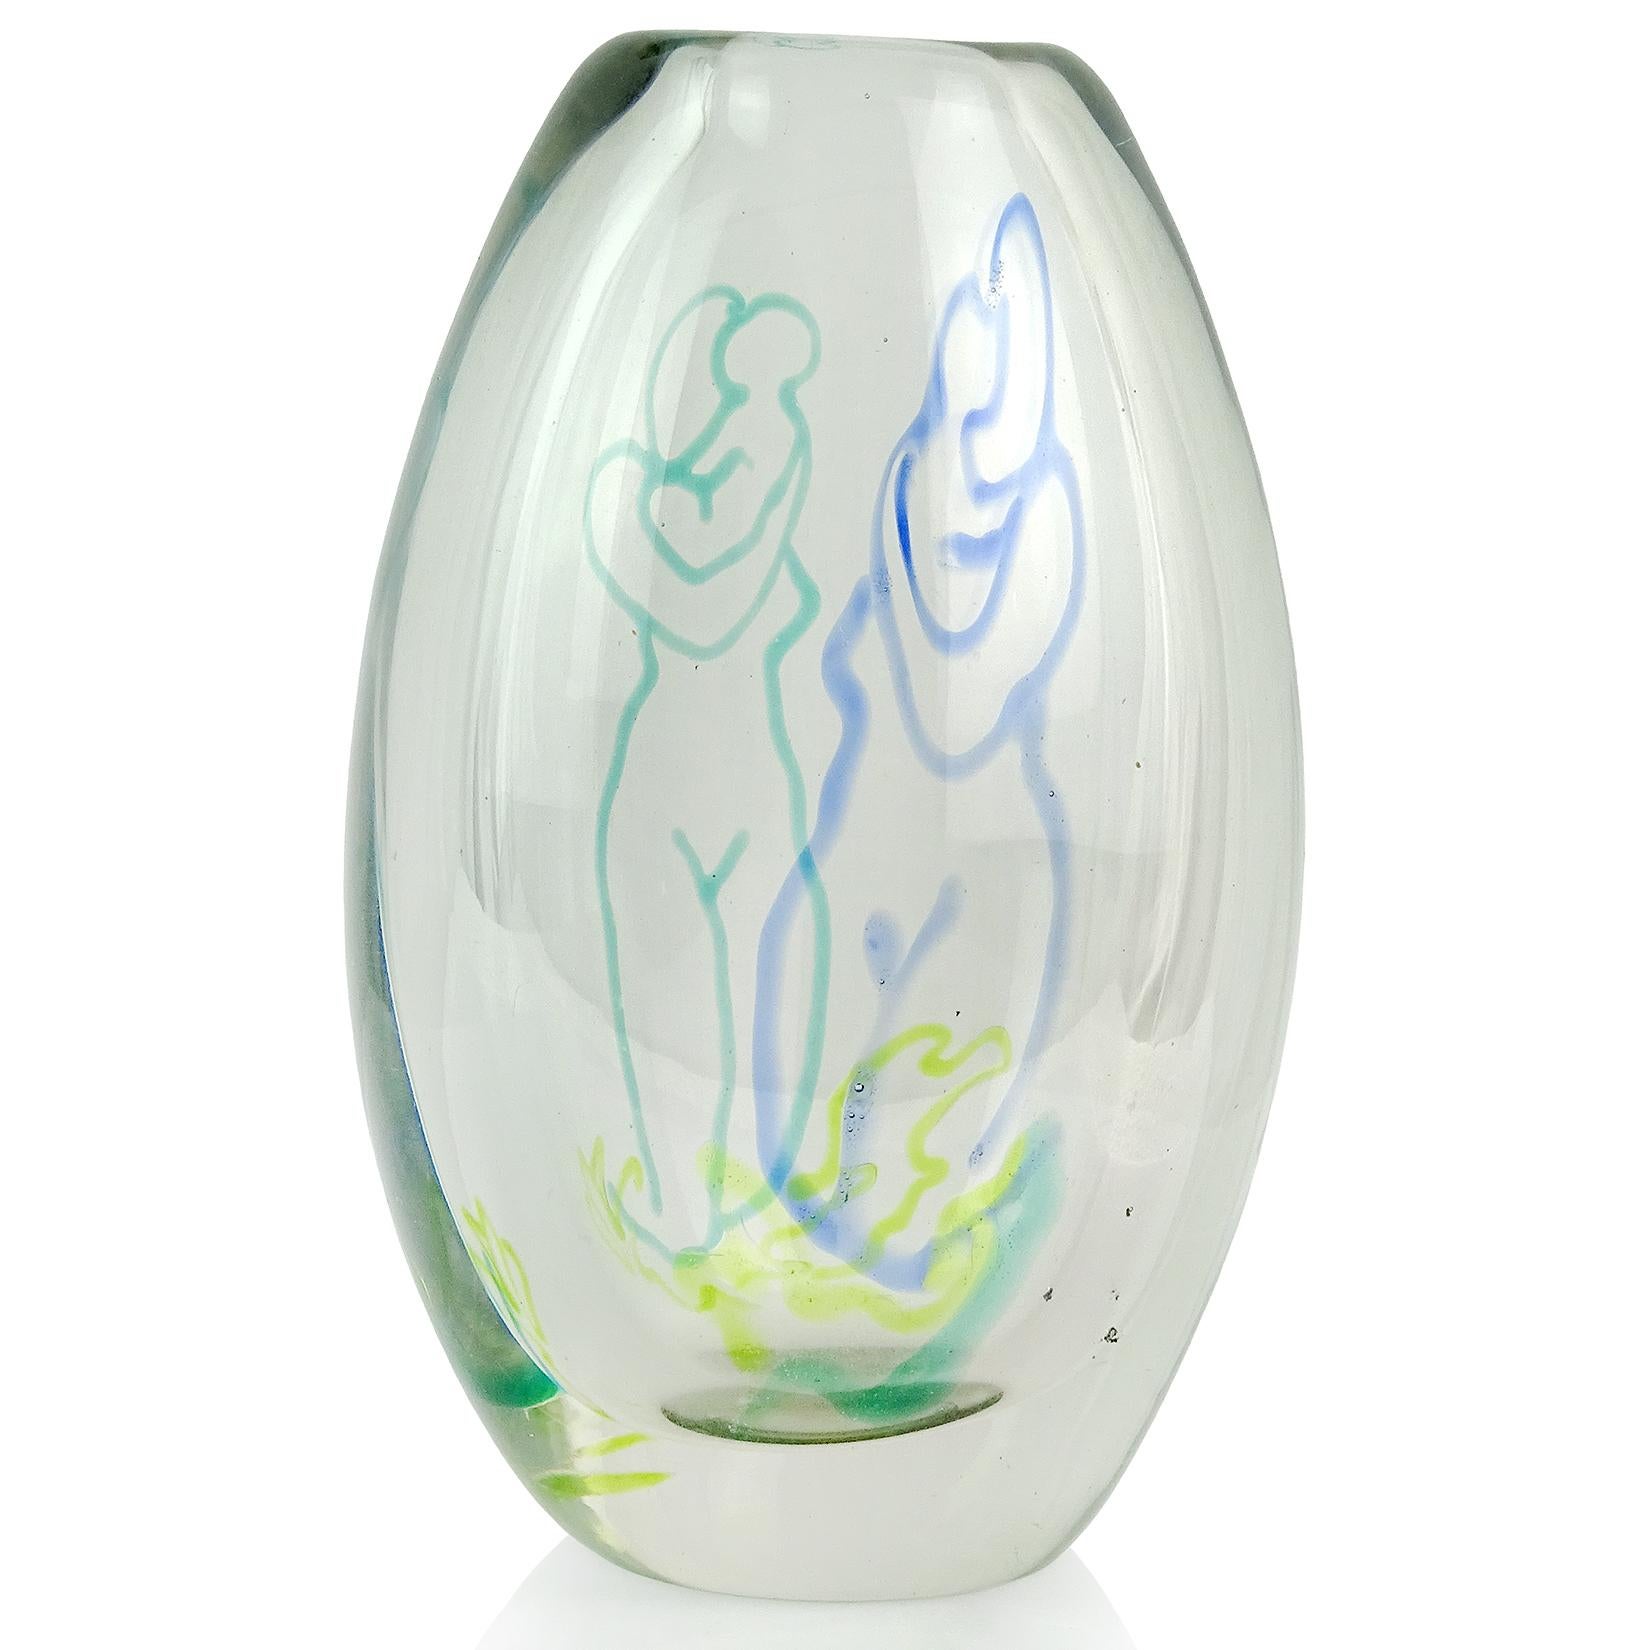 Beautiful and rare Tora Pors hand blown teal green, blue and yellow Swedish art glass mother and child flower vase. Created in the Myrica technique, invented by Tora Pors, a Danish designer who worked for Kalmar Glasbruk (Swedish) from 1947-1954.